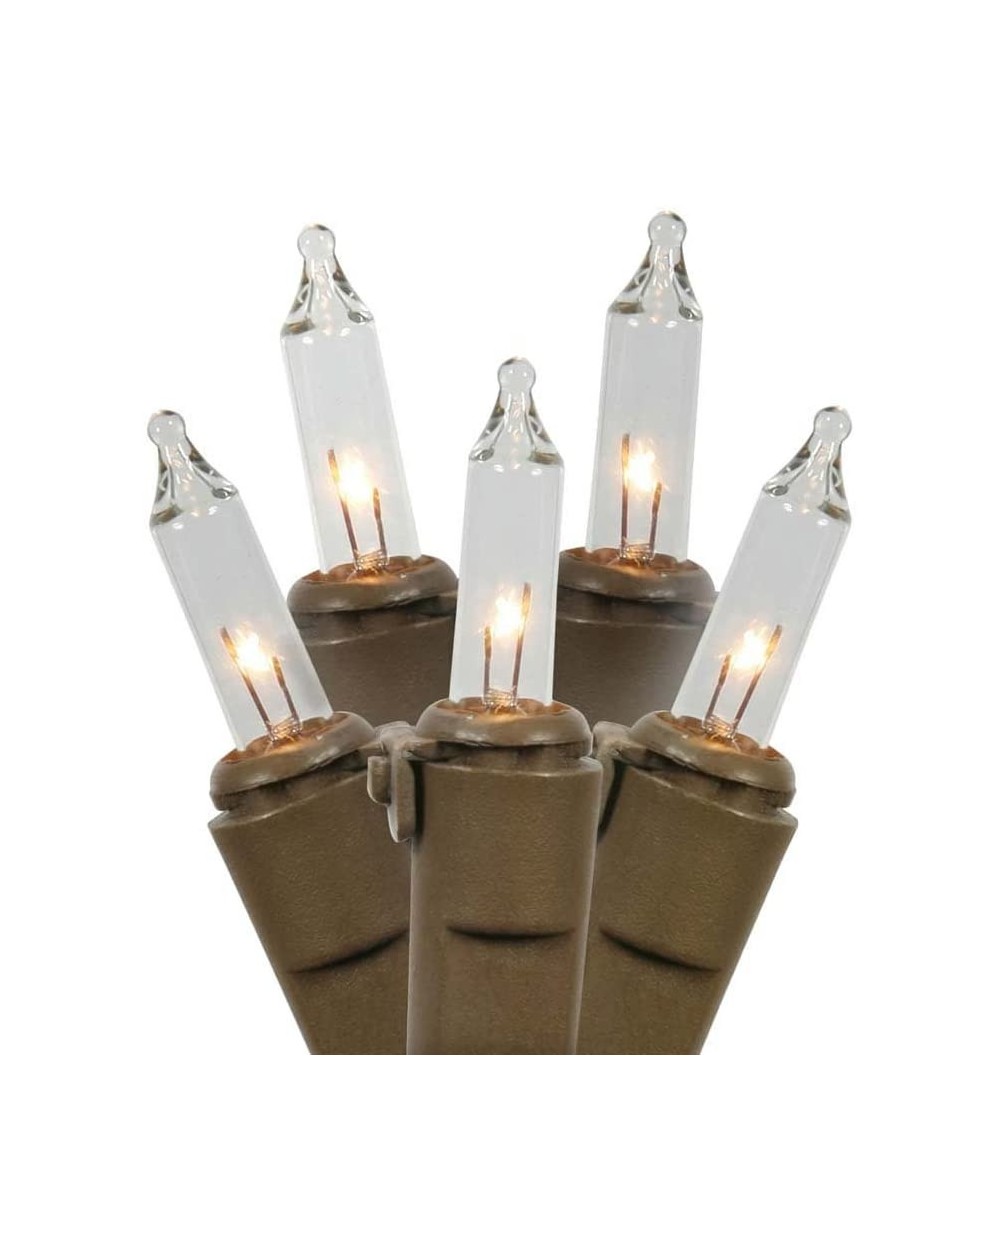 Indoor String Lights W5B1001 100 Light Set Clear Mini-Lights on Brown Wire - Clear - CK115HM8K87 $20.21